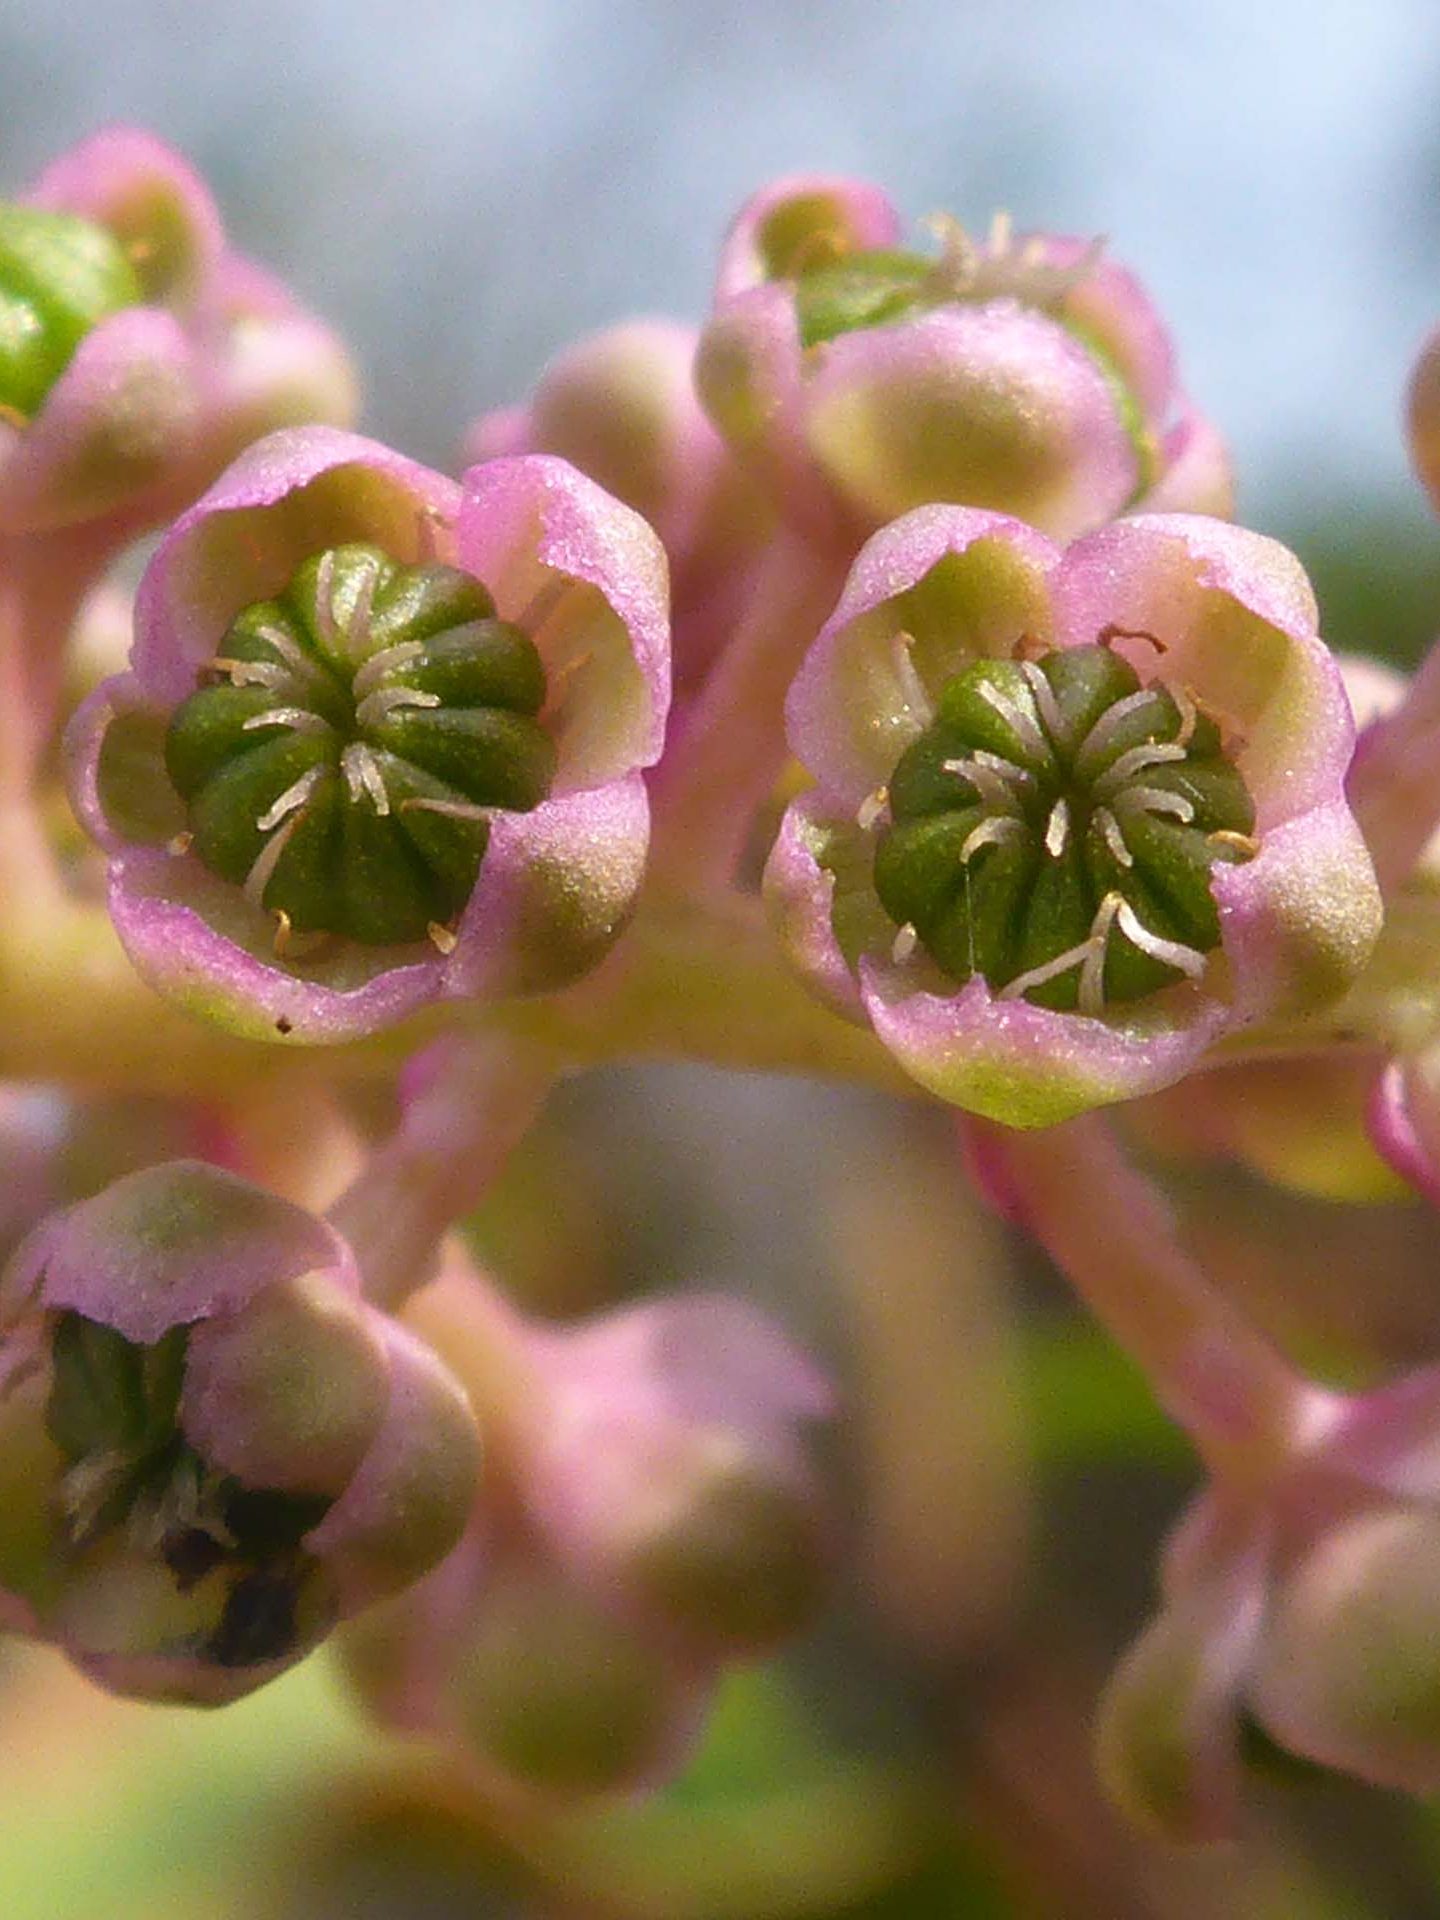 Close-up of Pokeweed flowers. D. Burk.